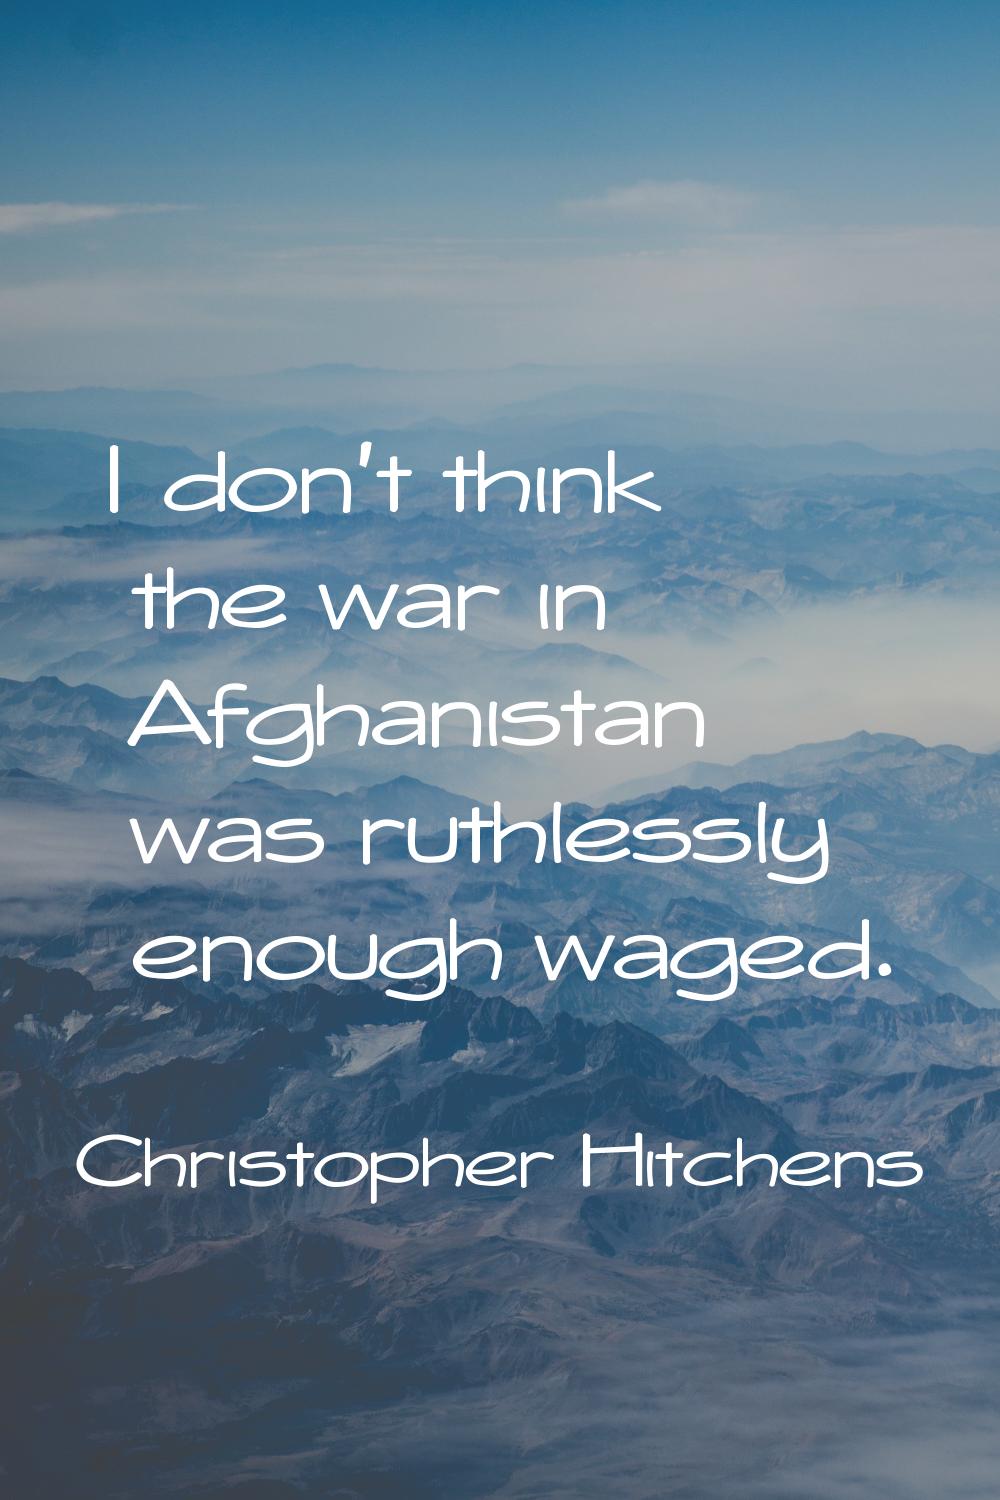 I don't think the war in Afghanistan was ruthlessly enough waged.